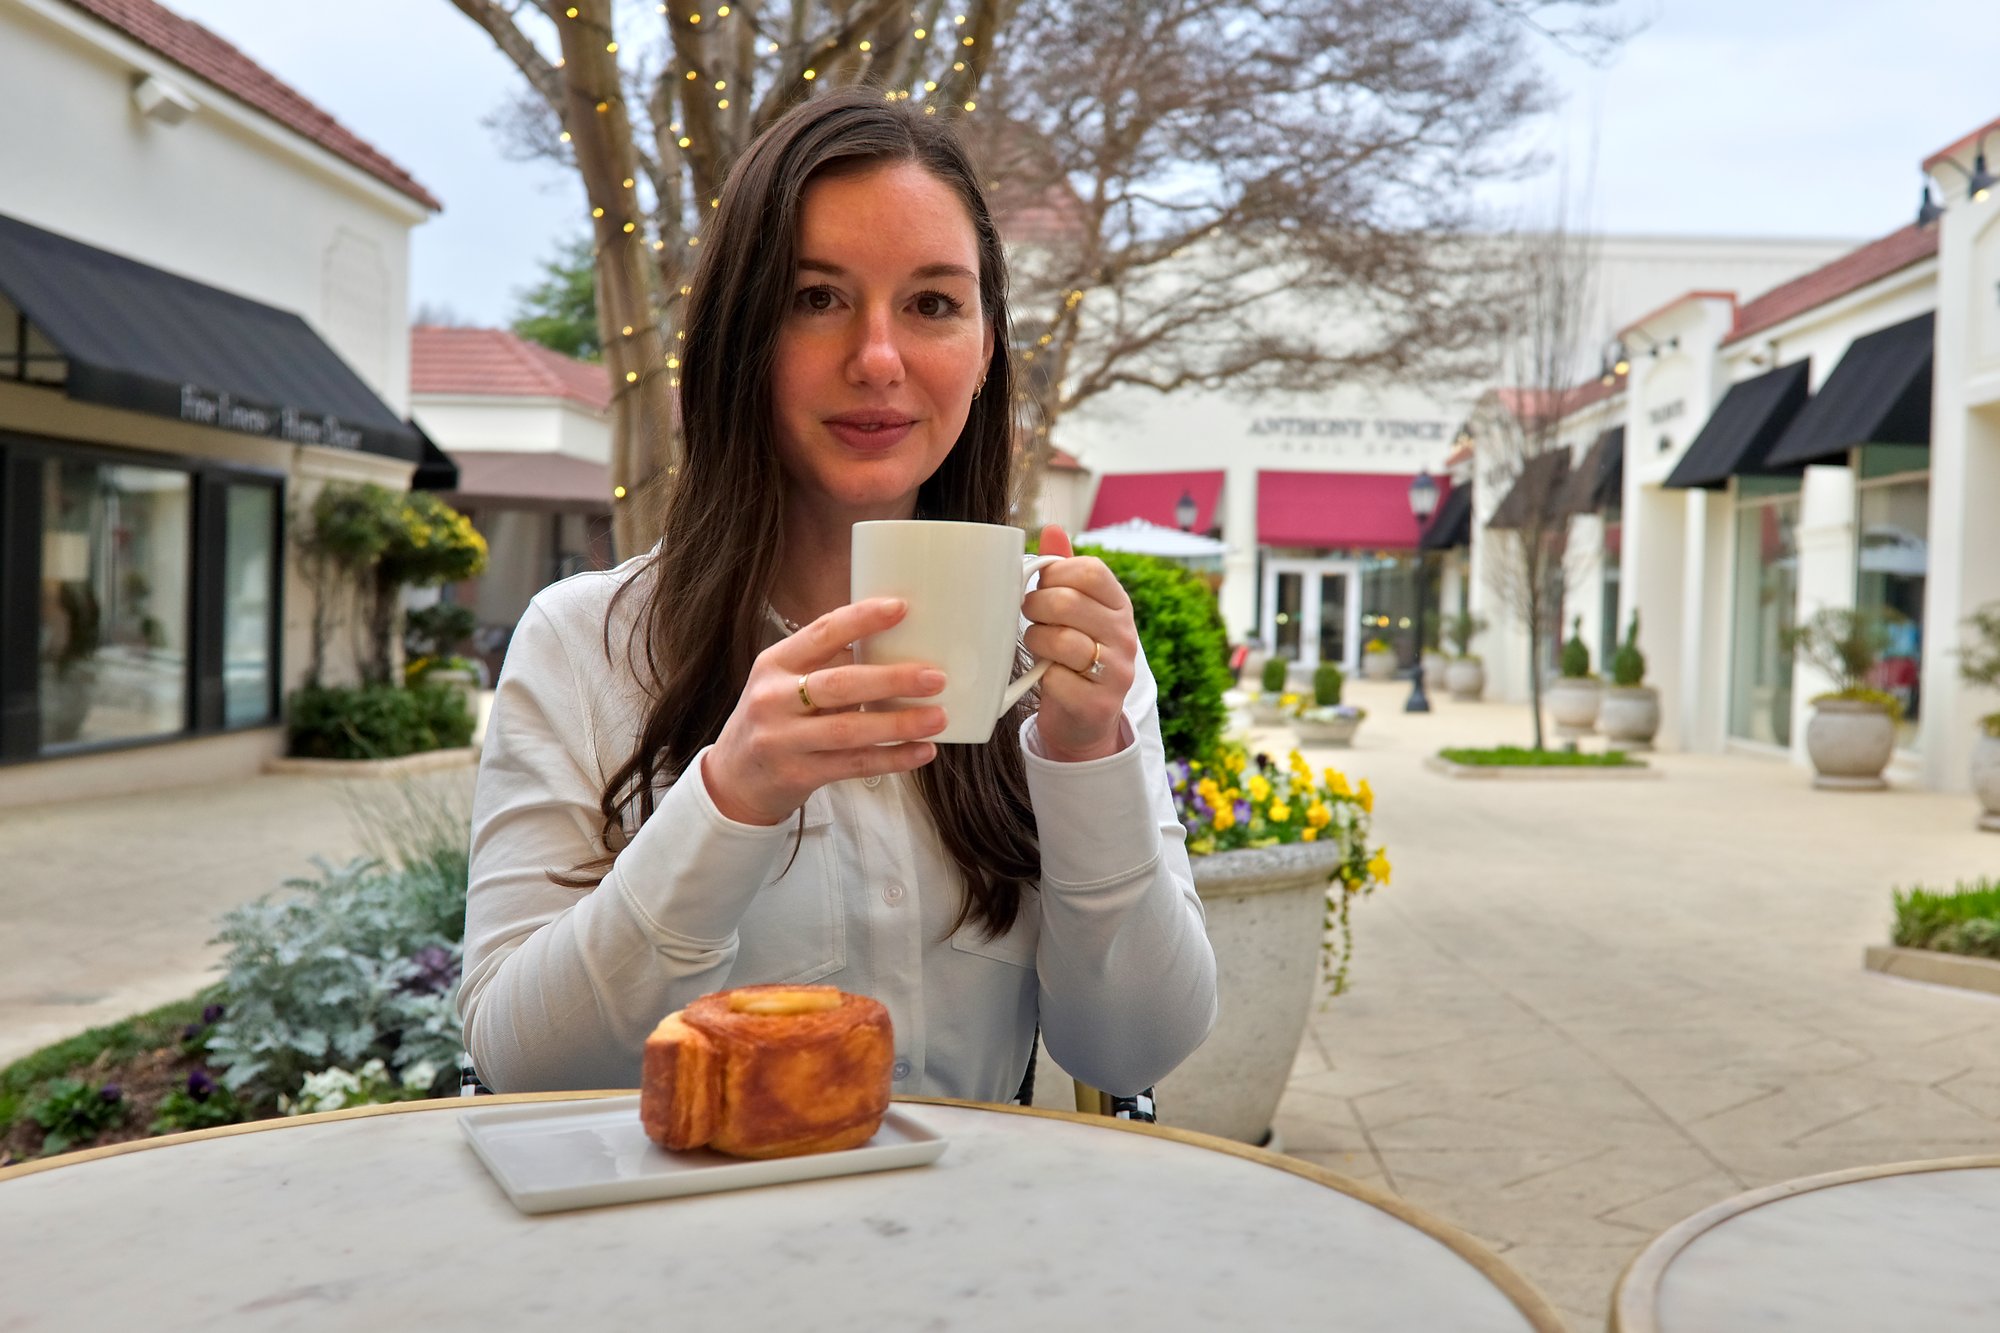 Alyssa sits at a bistro table with a pastry and holds a cup of coffee